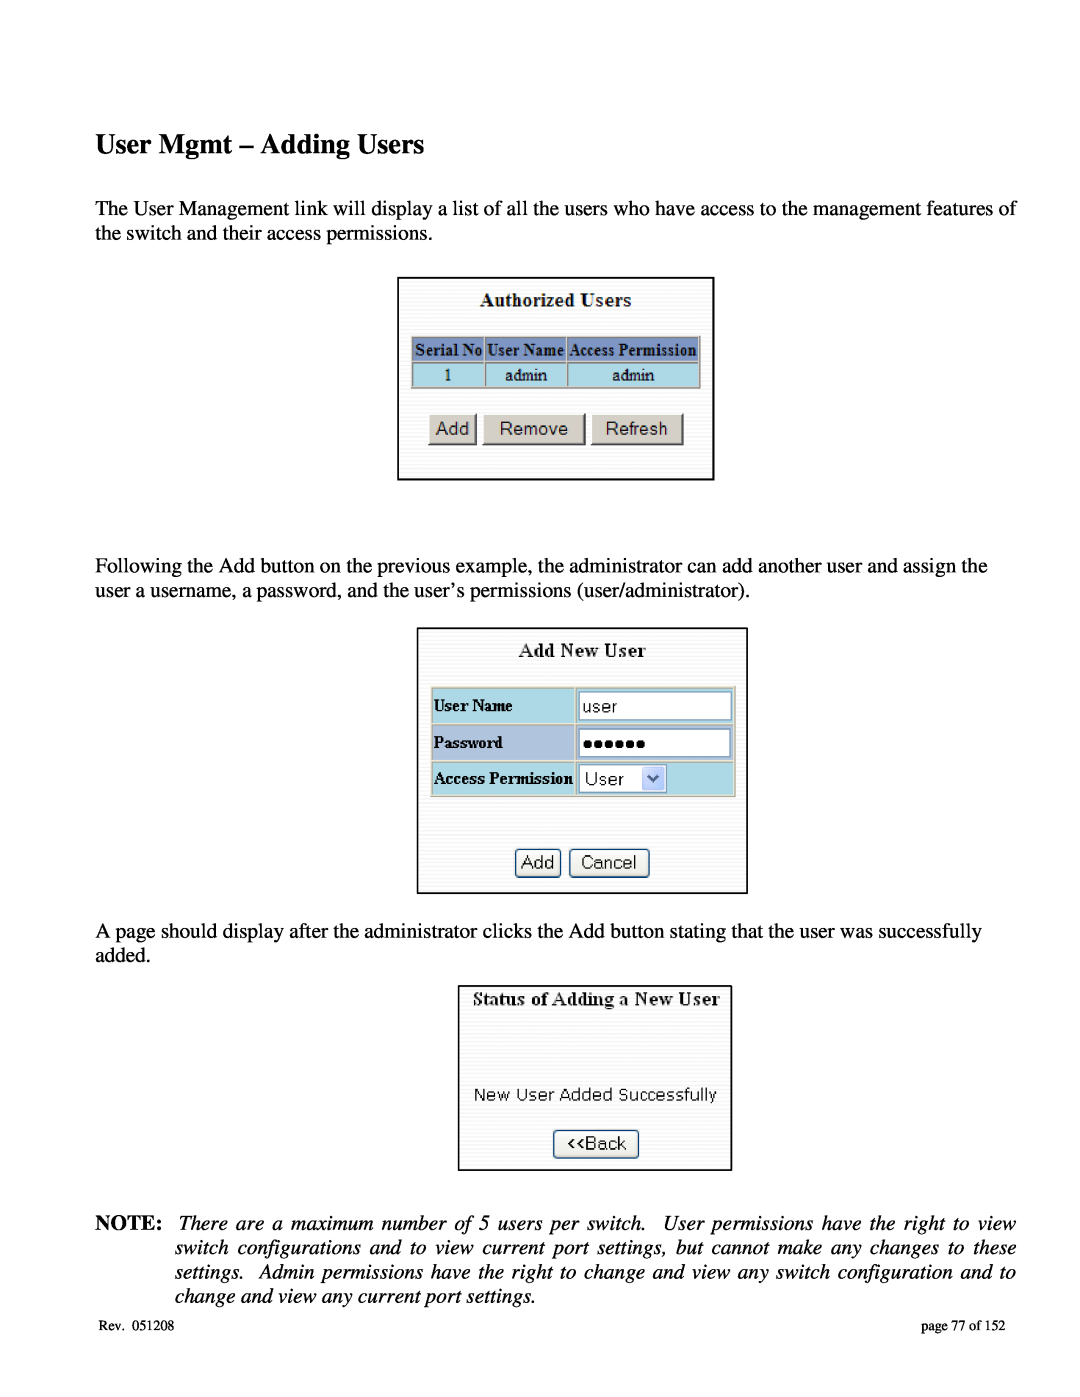 Gigabyte 7014 user manual User Mgmt - Adding Users, page 77 of 